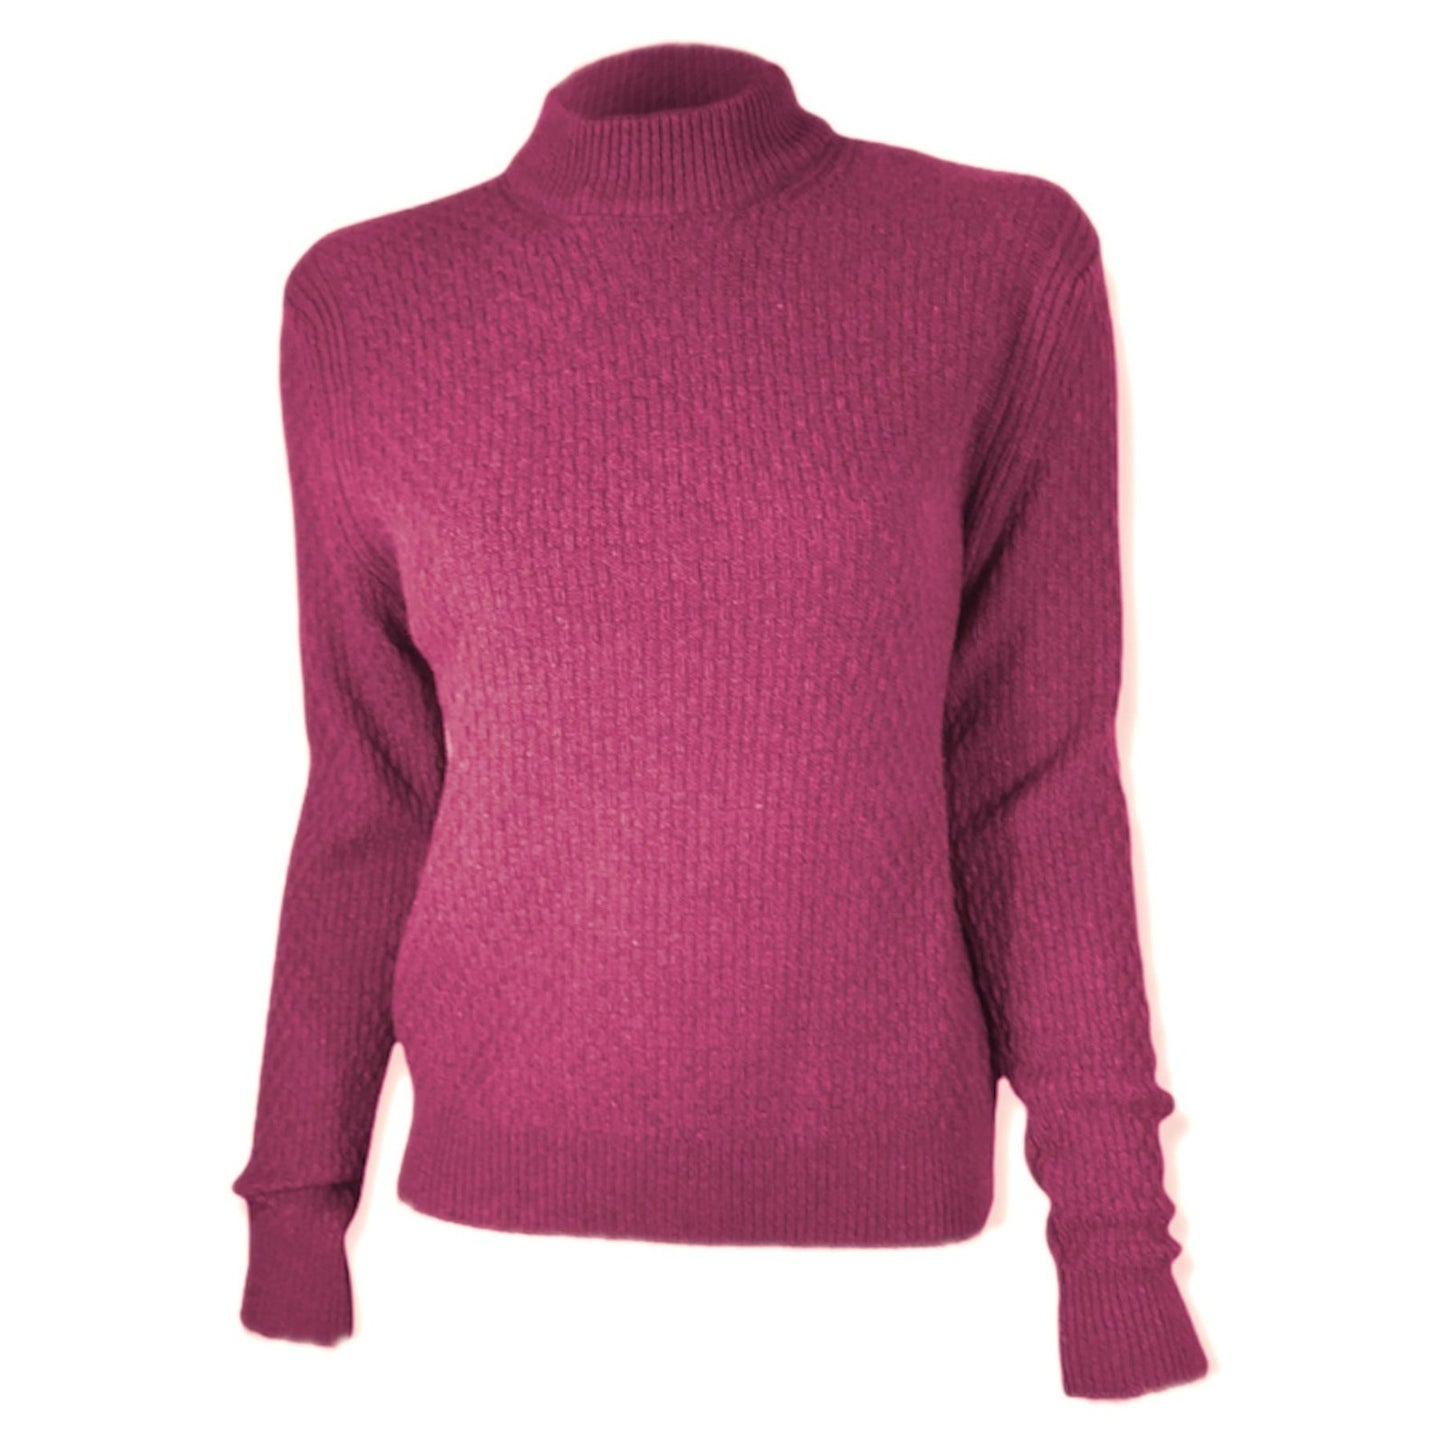 Recycelter Kaschmirwolle Pullover - Caterina